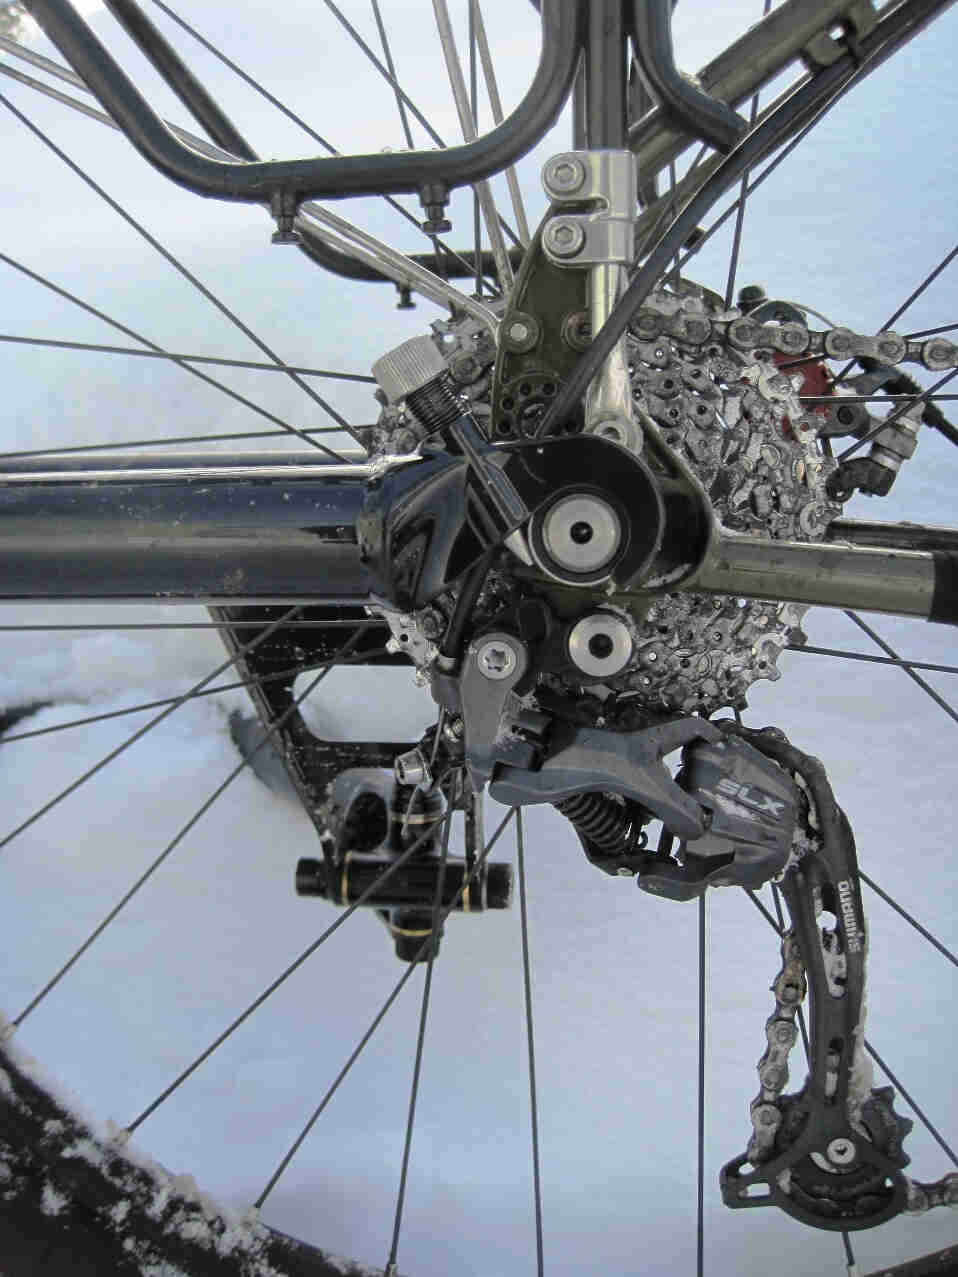 Right side, close up view of a drive side dropout from a Surly Troll bike, with snow in the background